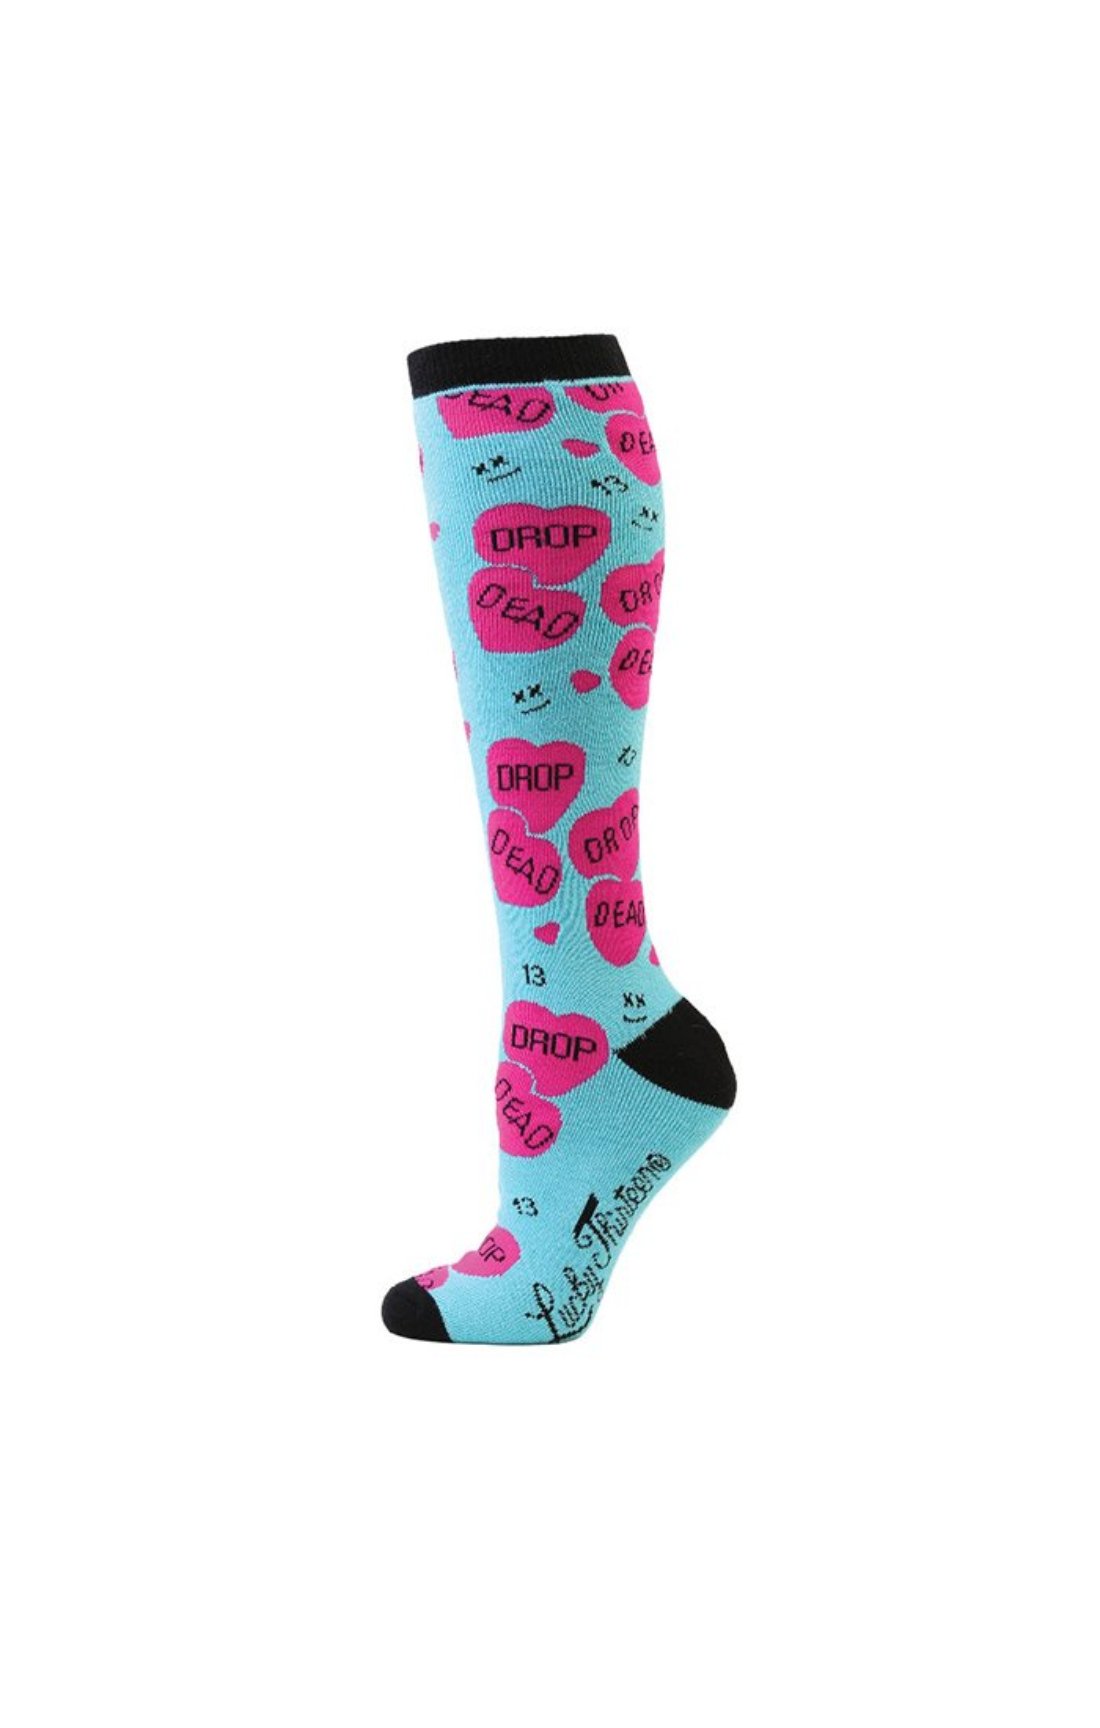 The DROP DEAD Knee High Socks- Turquoise/Pink